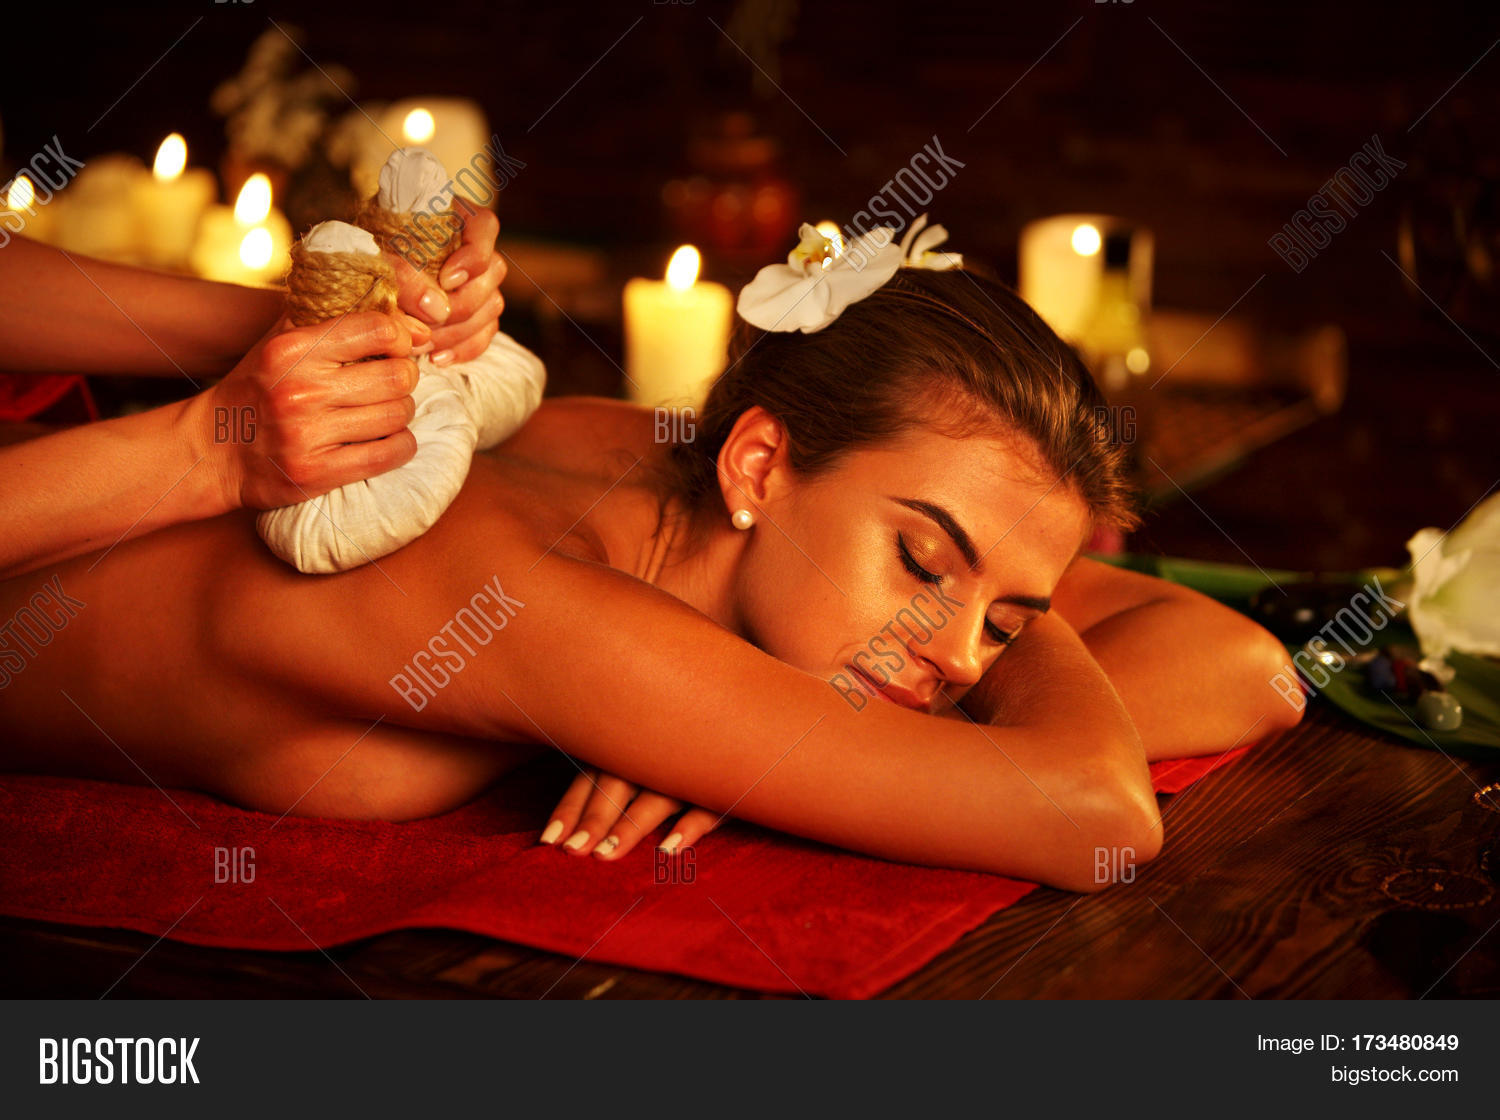 alta ball recommends hot girl gives massage pic